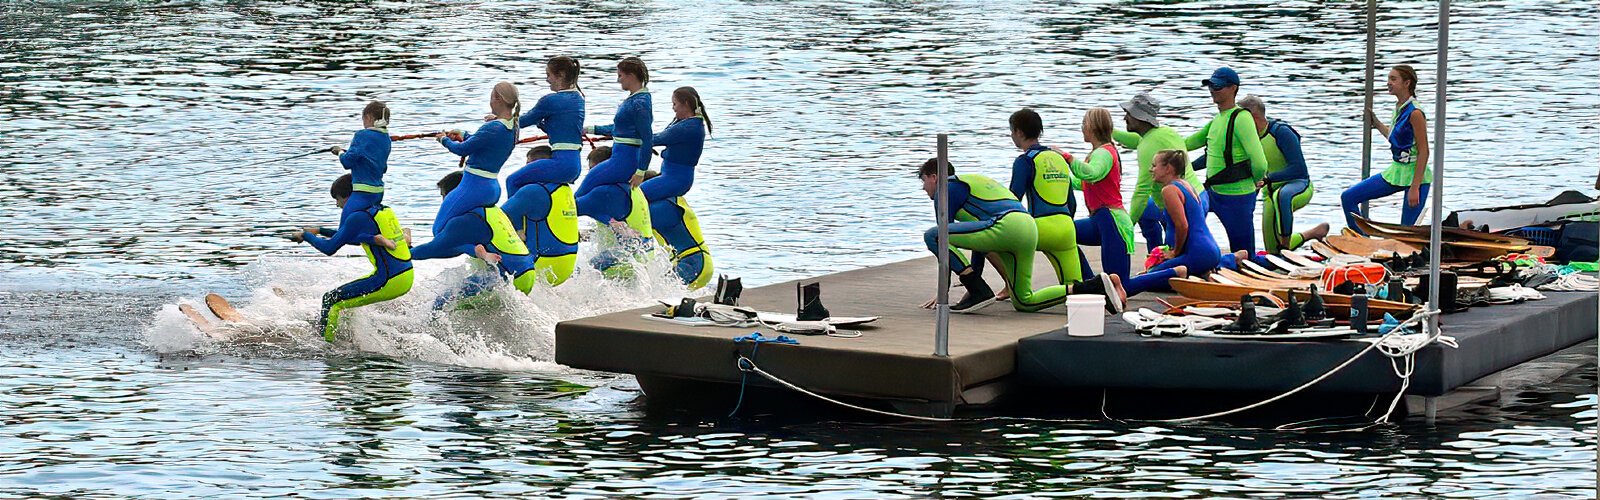  Ready to perform, five pairs of skiers take off from the floating dock on the Hillsborough River.